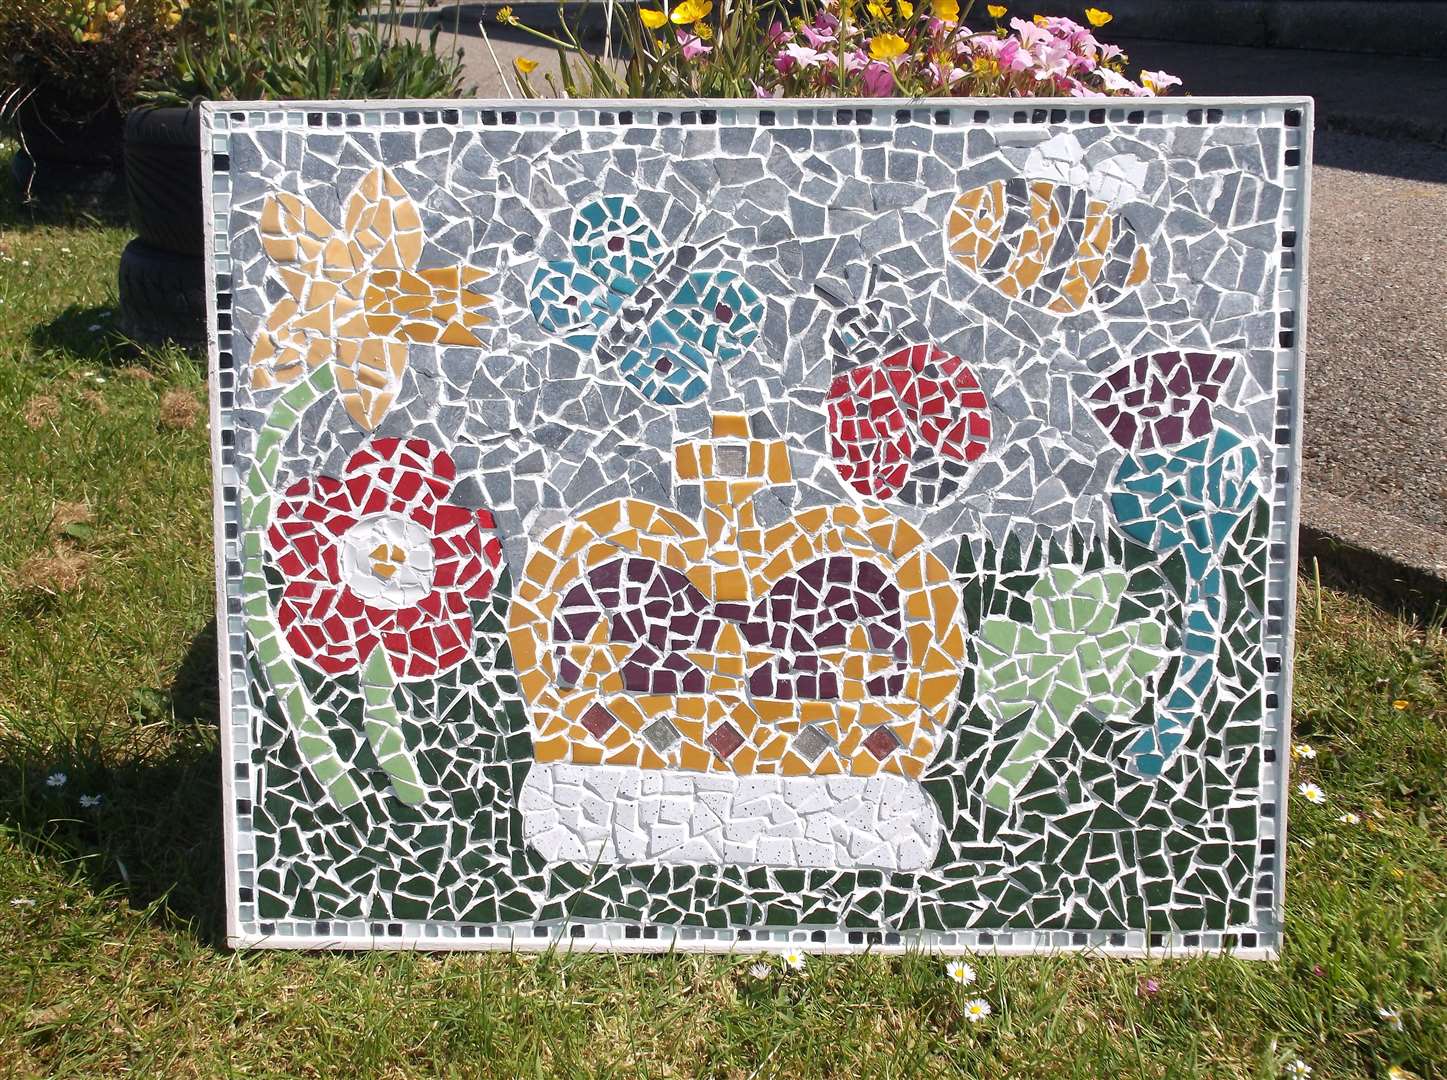 Mosaic gifted to HRH King Charles